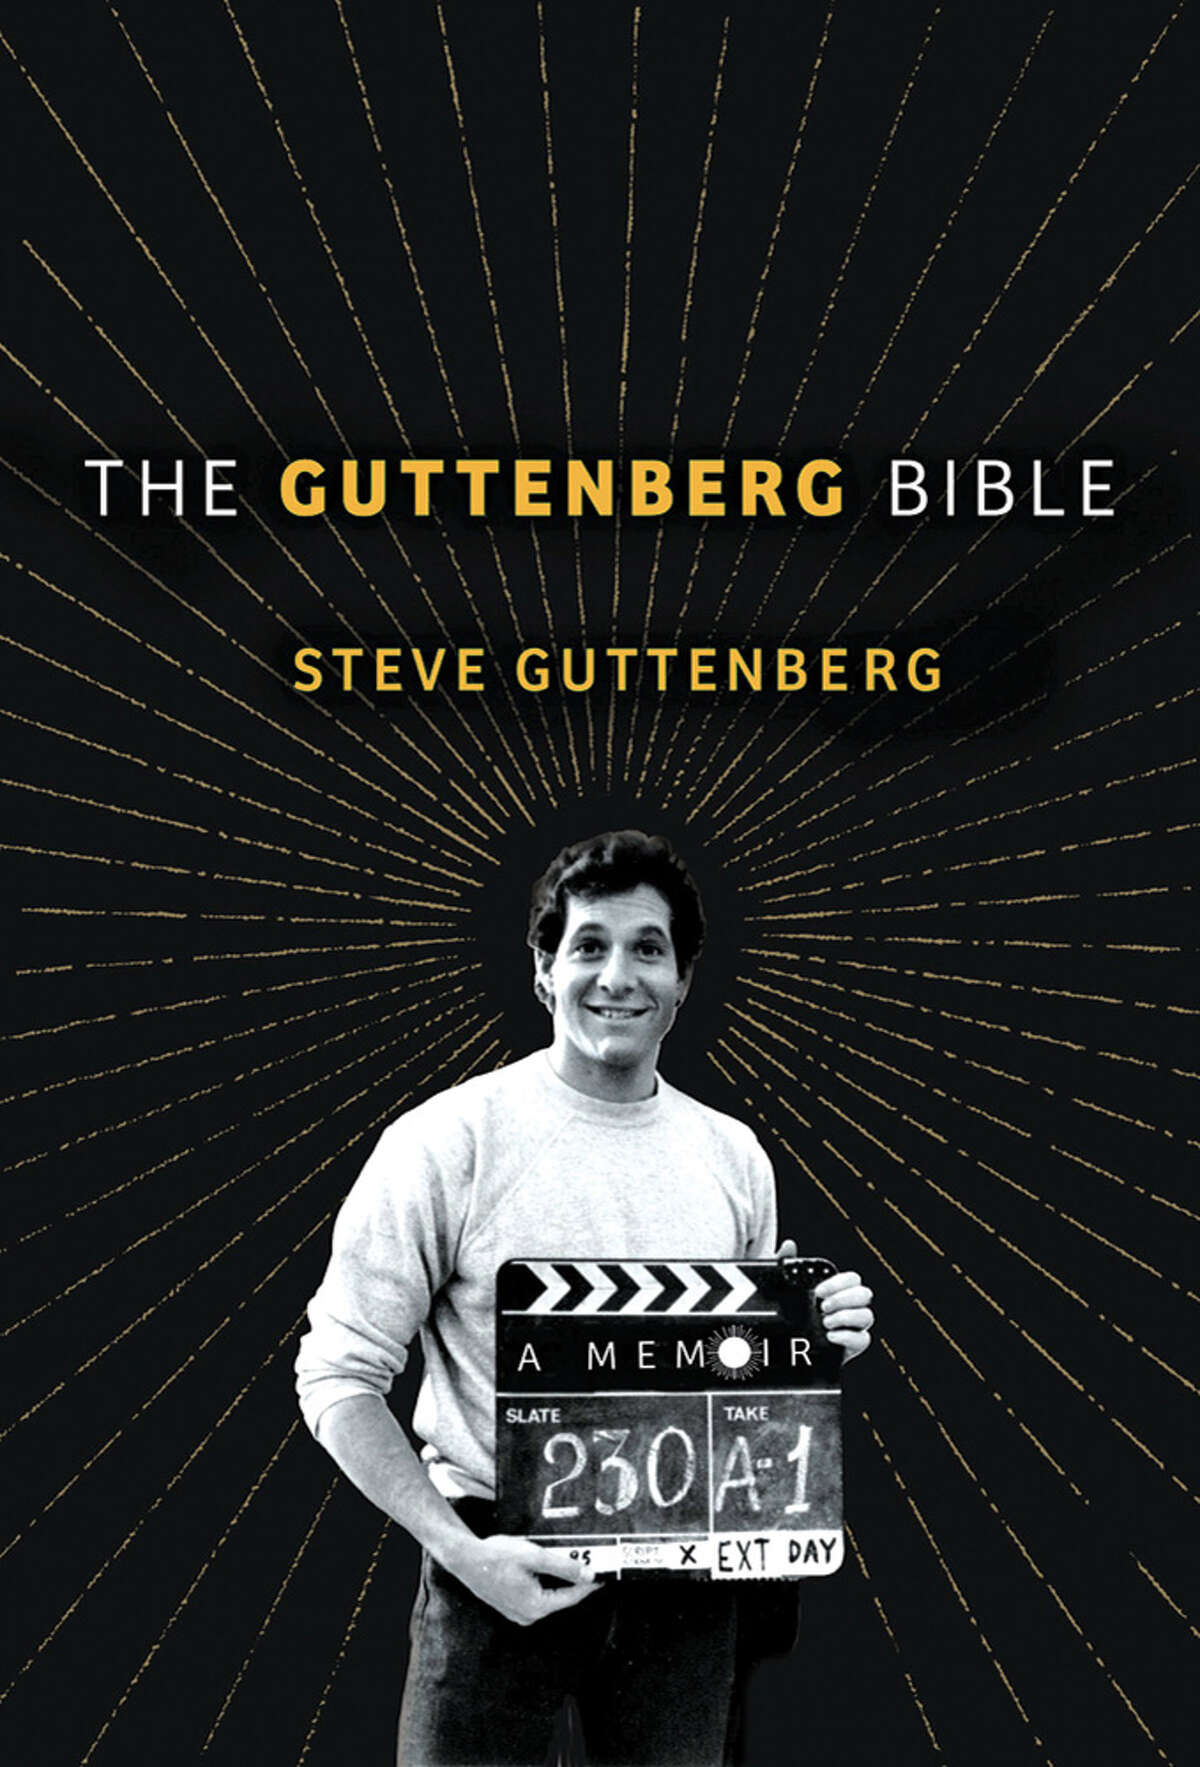 Actor Steve Guttenberg will be on hand to talk about his new memoir, "The Guttenberg Bible," and for a 30th anniversary screening of his hit film, "Diner," at the Avon Theatre in Stamford on Tuesday, June 5.